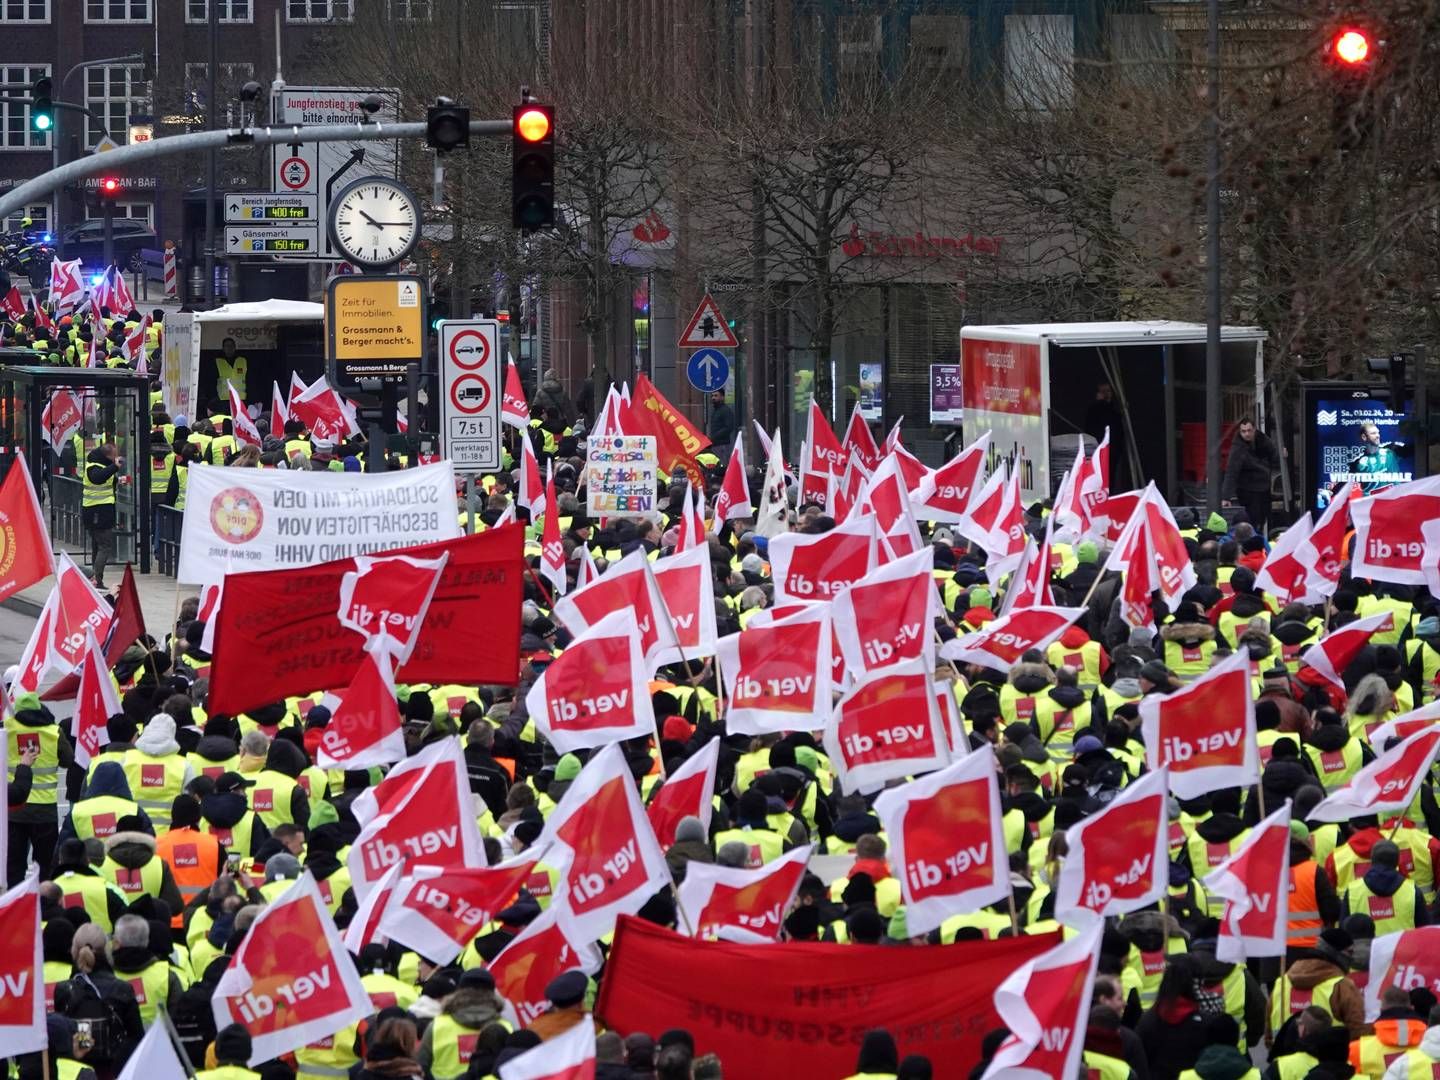 Protests and work stoppages have become commonplace in Germany, with transport workers, among others, striking in an attempt to get a better collective agreement. | Photo: Rabea Gruber/AP/Ritzau Scanpix